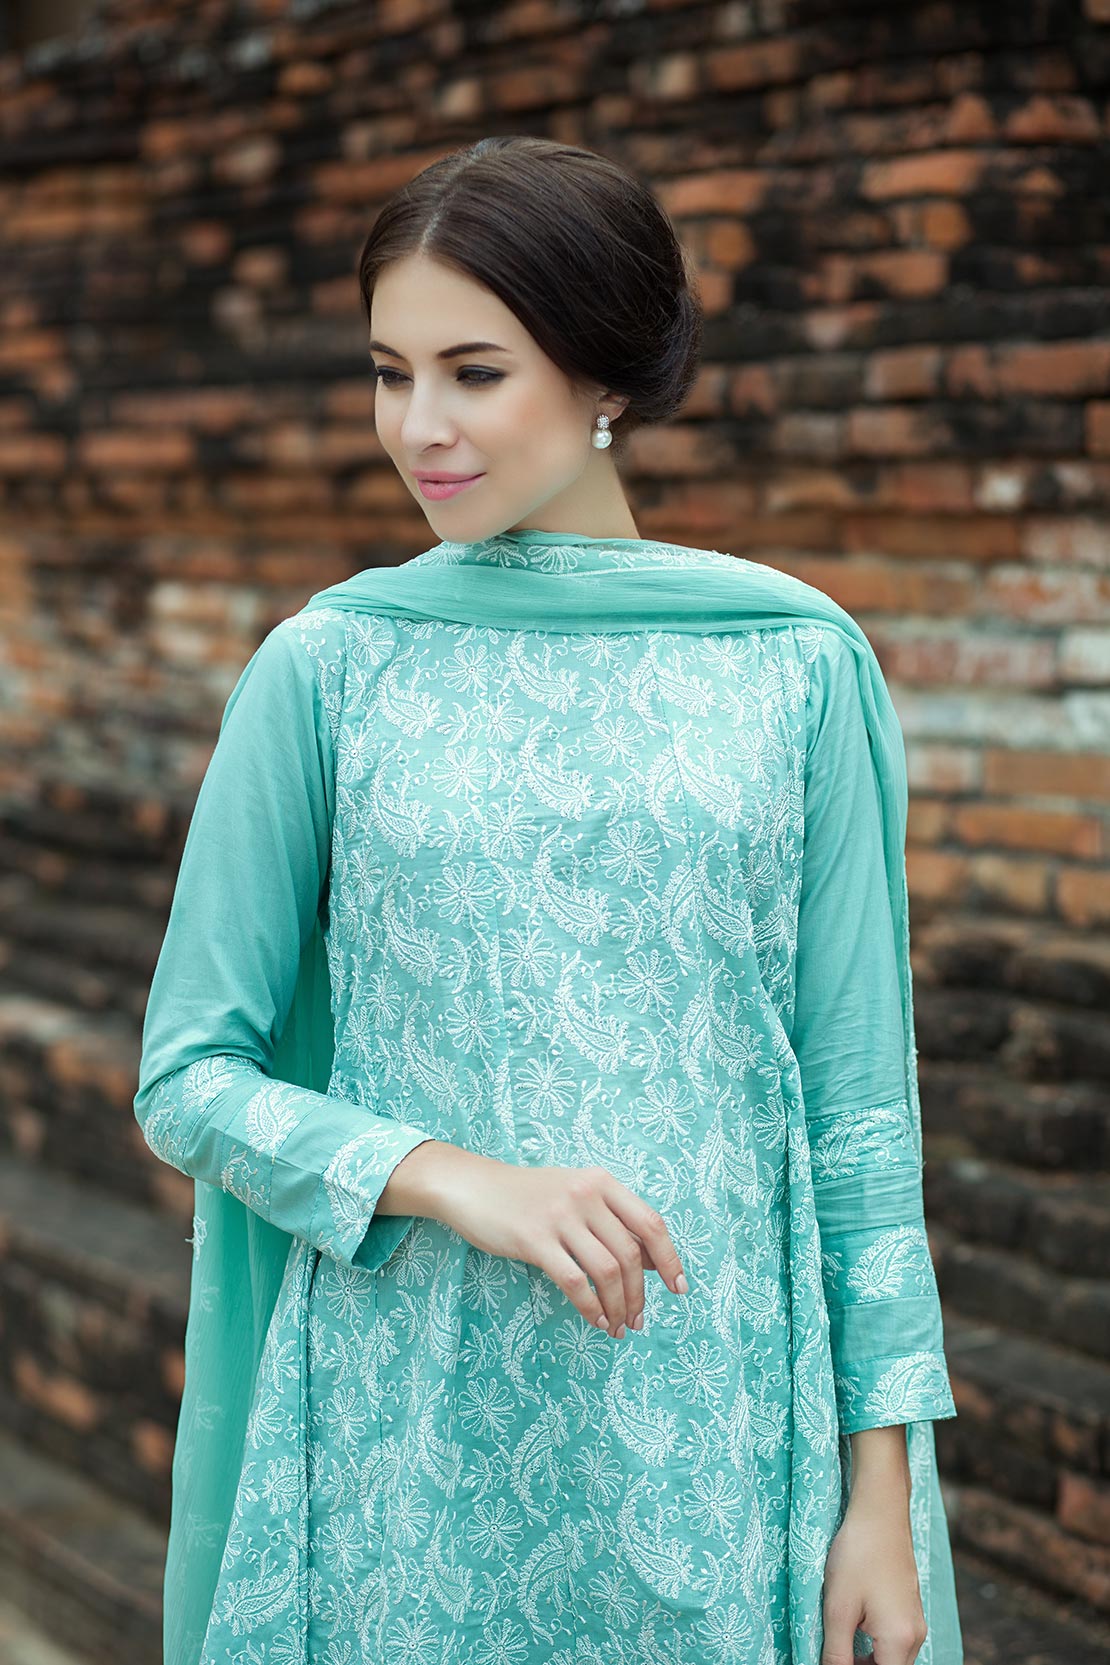 Buy this elegant turquoise lawn 3 piece pret dress by Taana Baana pret wear 2019 at a very reasonable price